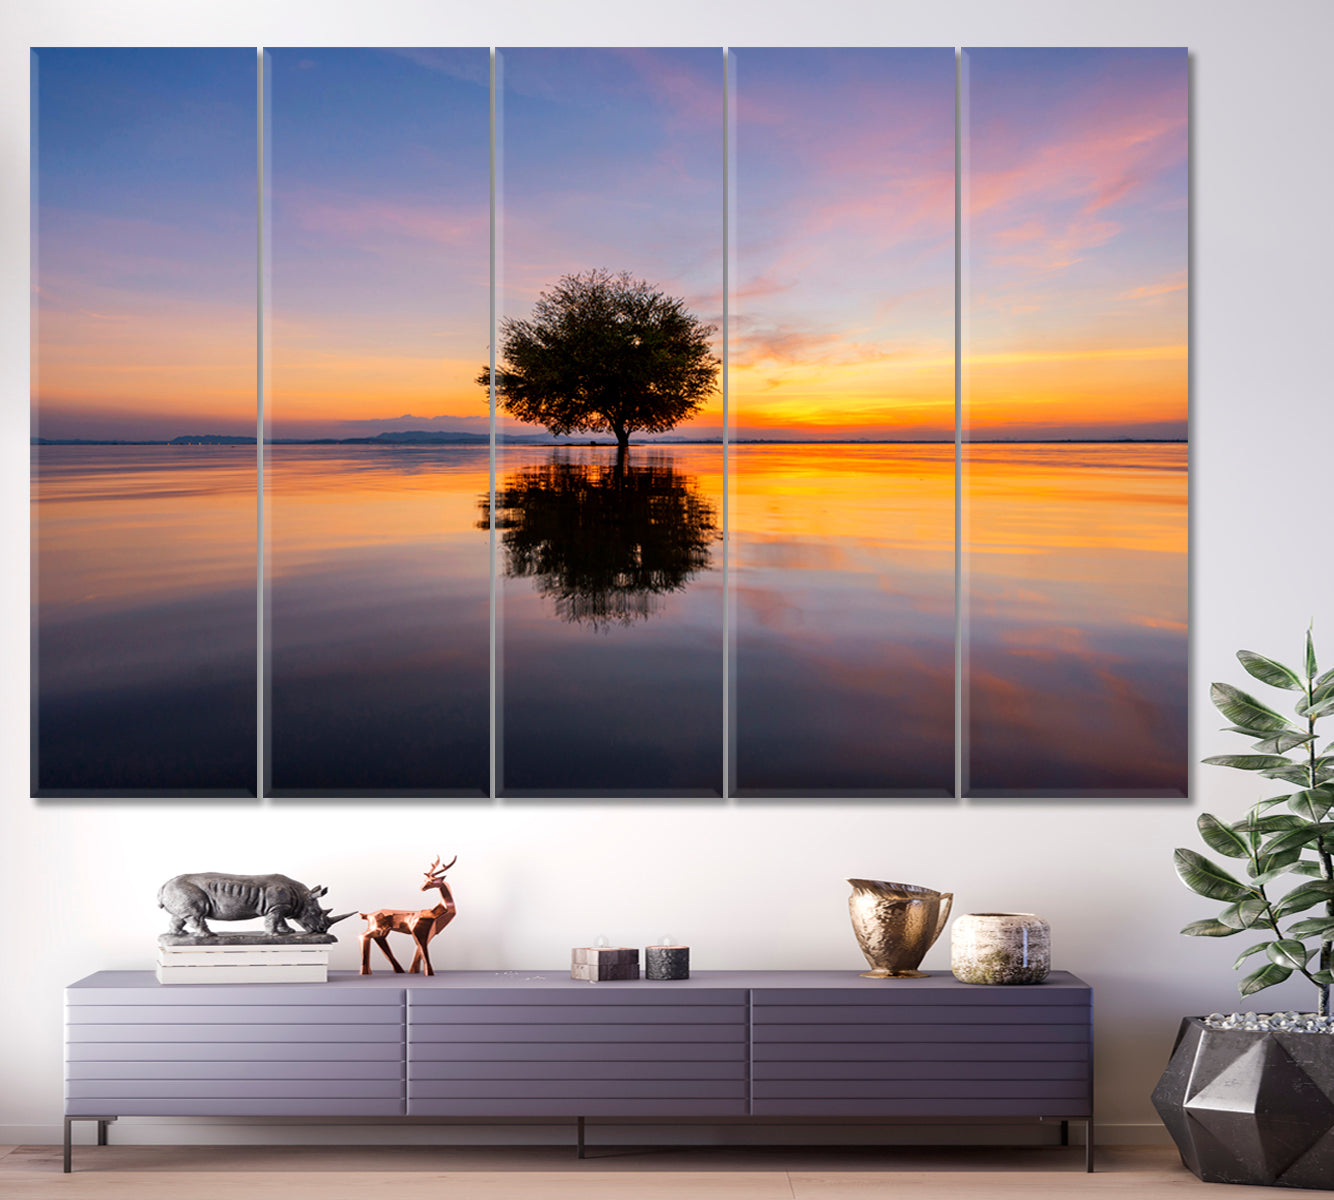 Breathtaking Landscape Inspired by Nature Sunset Over Water Flooded Trees Scenery Landscape Fine Art Print Artesty   